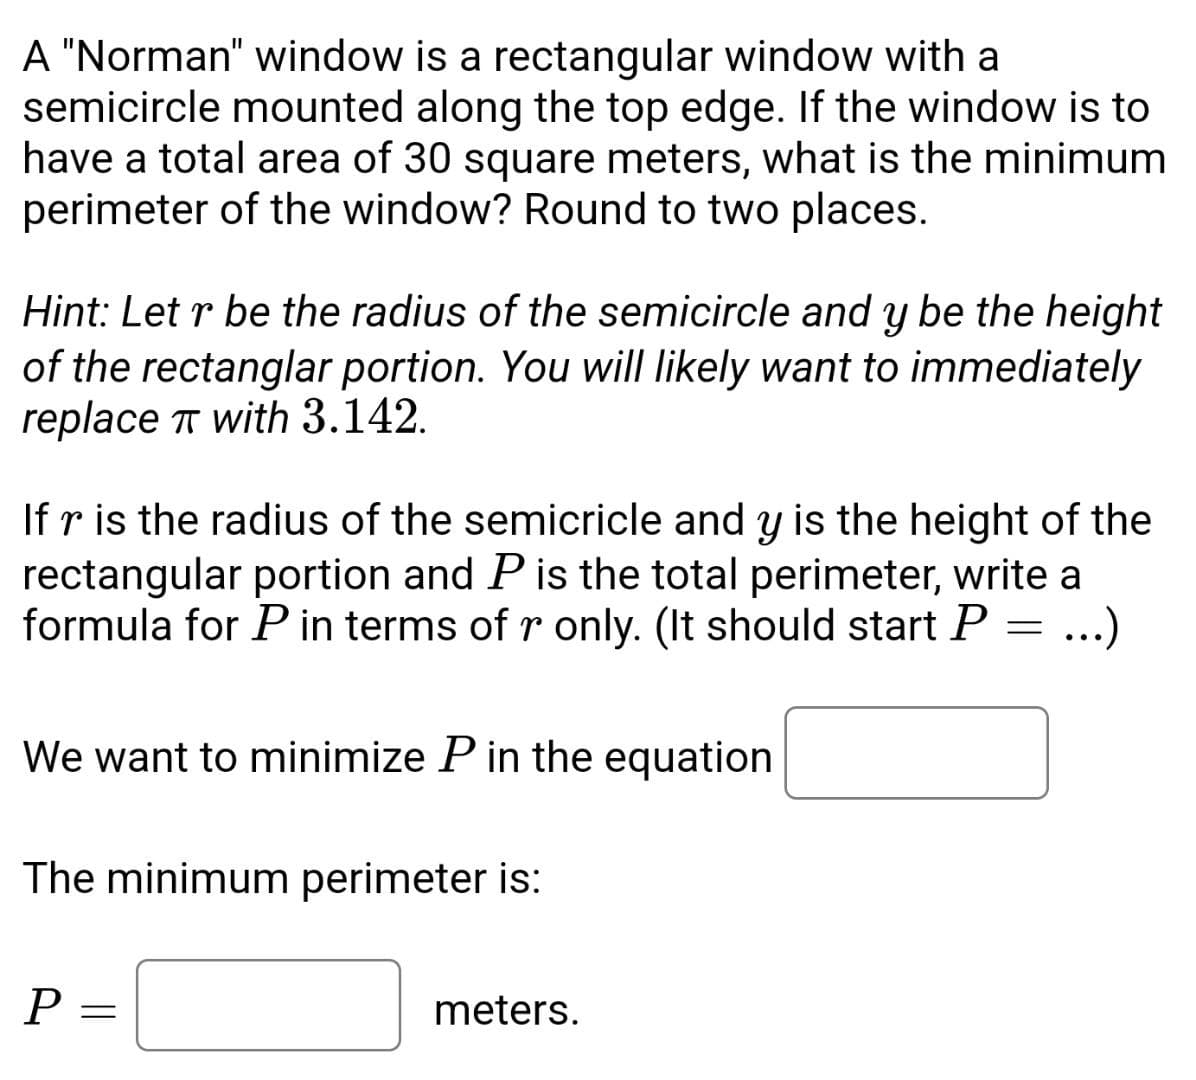 A "Norman" window is a rectangular window with a
semicircle mounted along the top edge. If the window is to
have a total area of 30 square meters, what is the minimum
perimeter of the window? Round to two places.
Hint: Let r be the radius of the semicircle and y be the height
of the rectanglar portion. You will likely want to immediately
replace π with 3.142.
If r is the radius of the semicricle and y is the height of the
rectangular portion and P is the total perimeter, write a
formula for P in terms of r only. (It should start P = ...)
We want to minimize P in the equation
The minimum perimeter is:
P
=
meters.